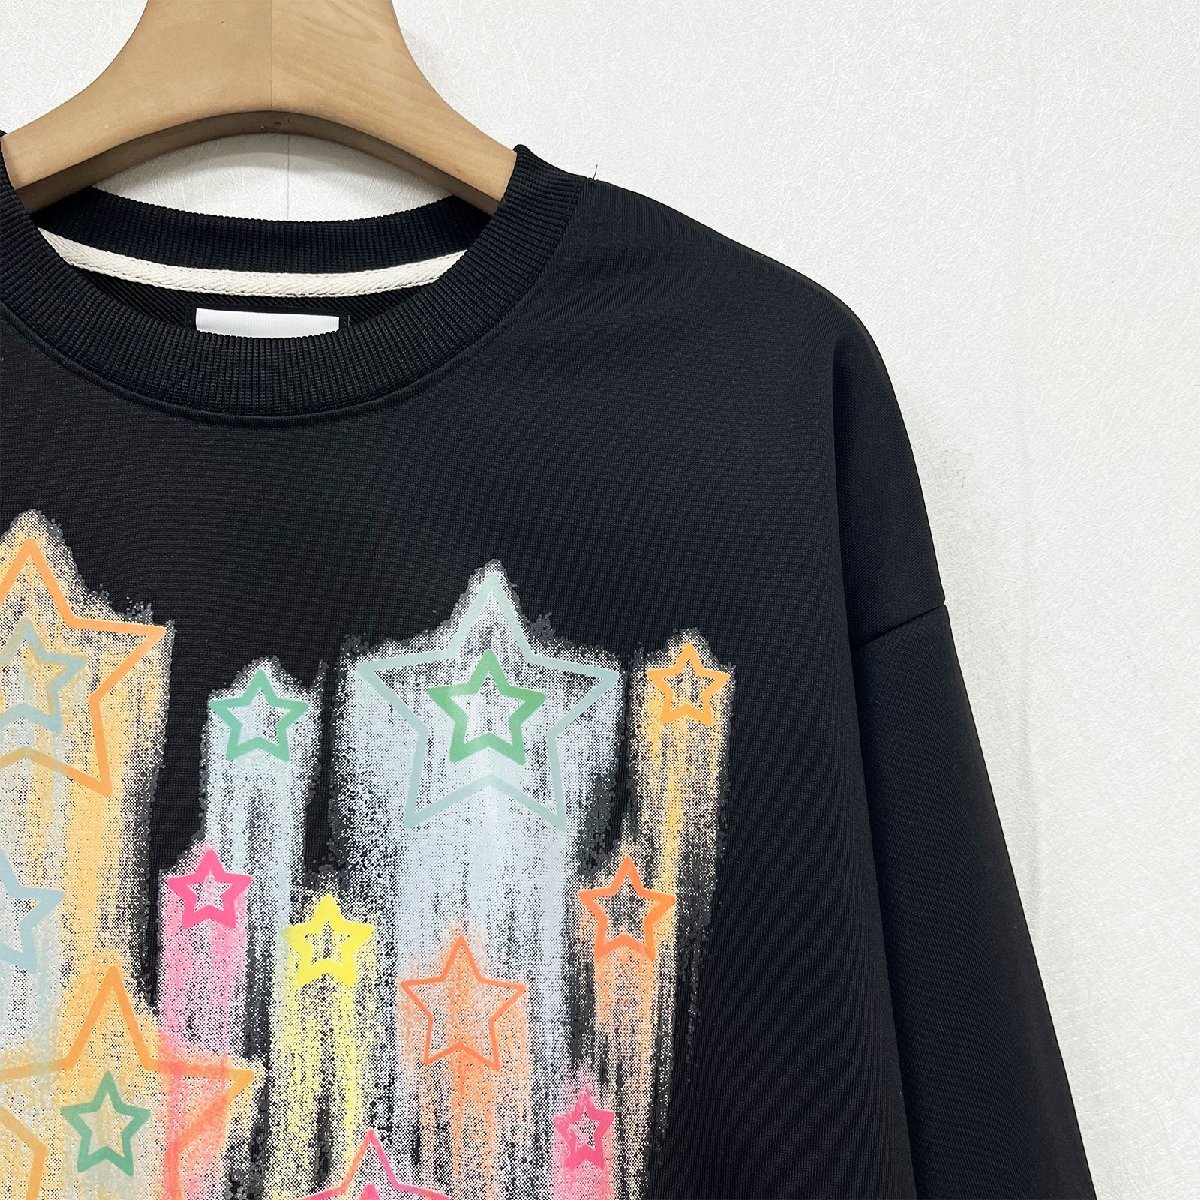  piece . Europe made * regular price 4 ten thousand * BVLGARY a departure *RISELIN sweatshirt on goods comfortable ventilation colorful star pattern tops sweat leisure spring summer L/48